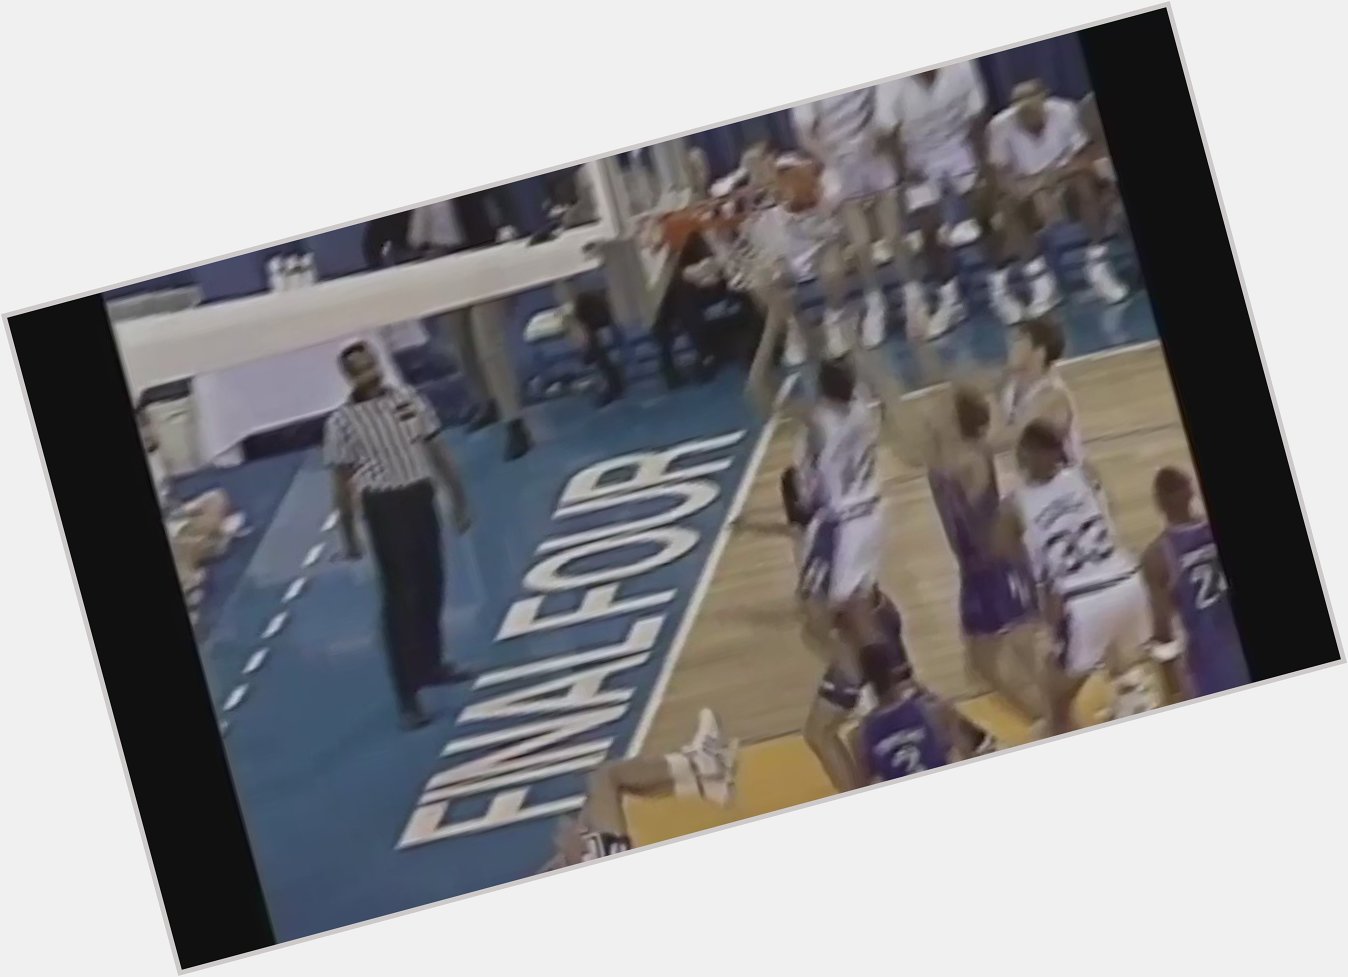 Happy 50th birthday to Hall of Famer Grant Hill, who had this insane dunk vs. Kansas in 1991. ( : 